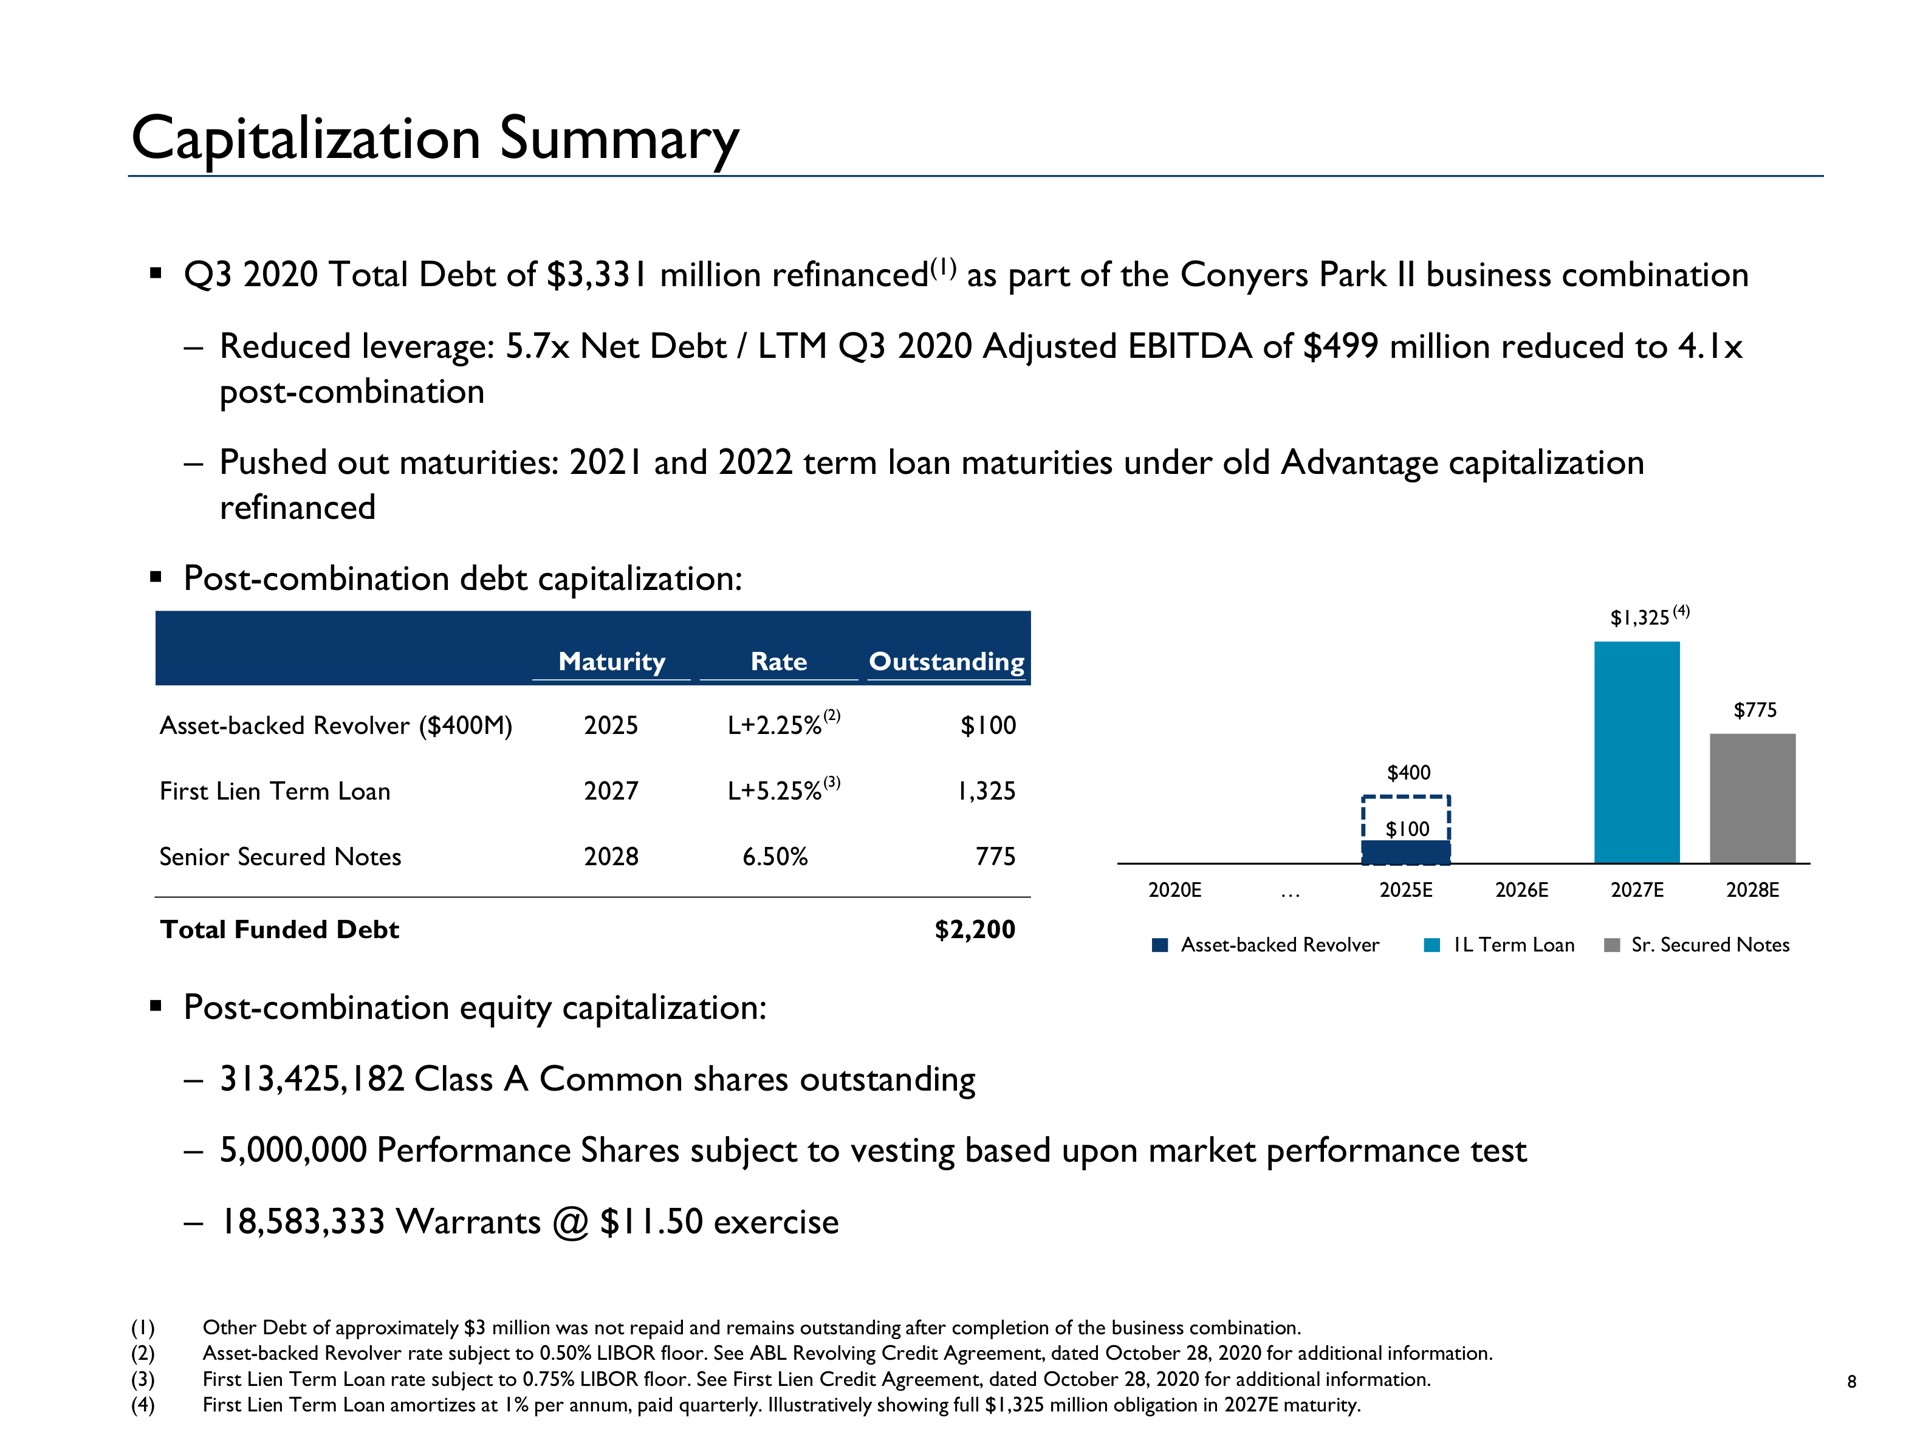 capitalization summary total debt of million refinanced as part of the park business combination reduced leverage net debt adjusted of million reduced to post combination pushed out maturities and term loan maturities under old advantage capitalization refinanced post combination debt capitalization post combination equity capitalization class a common shares outstanding performance shares subject to vesting based upon market performance test warrants exercise maturity rate asset backed revolver first lien senior secured notes funded one asset backed revolver secured notes other approximately was not repaid remains after completion asset backed revolver rate floor see revolving credit agreement dated for additional information first lien rate floor see first lien credit agreement dated for additional information first lien amortizes at per paid quarterly illustratively showing full obligation in maturity | Advantage Solutions